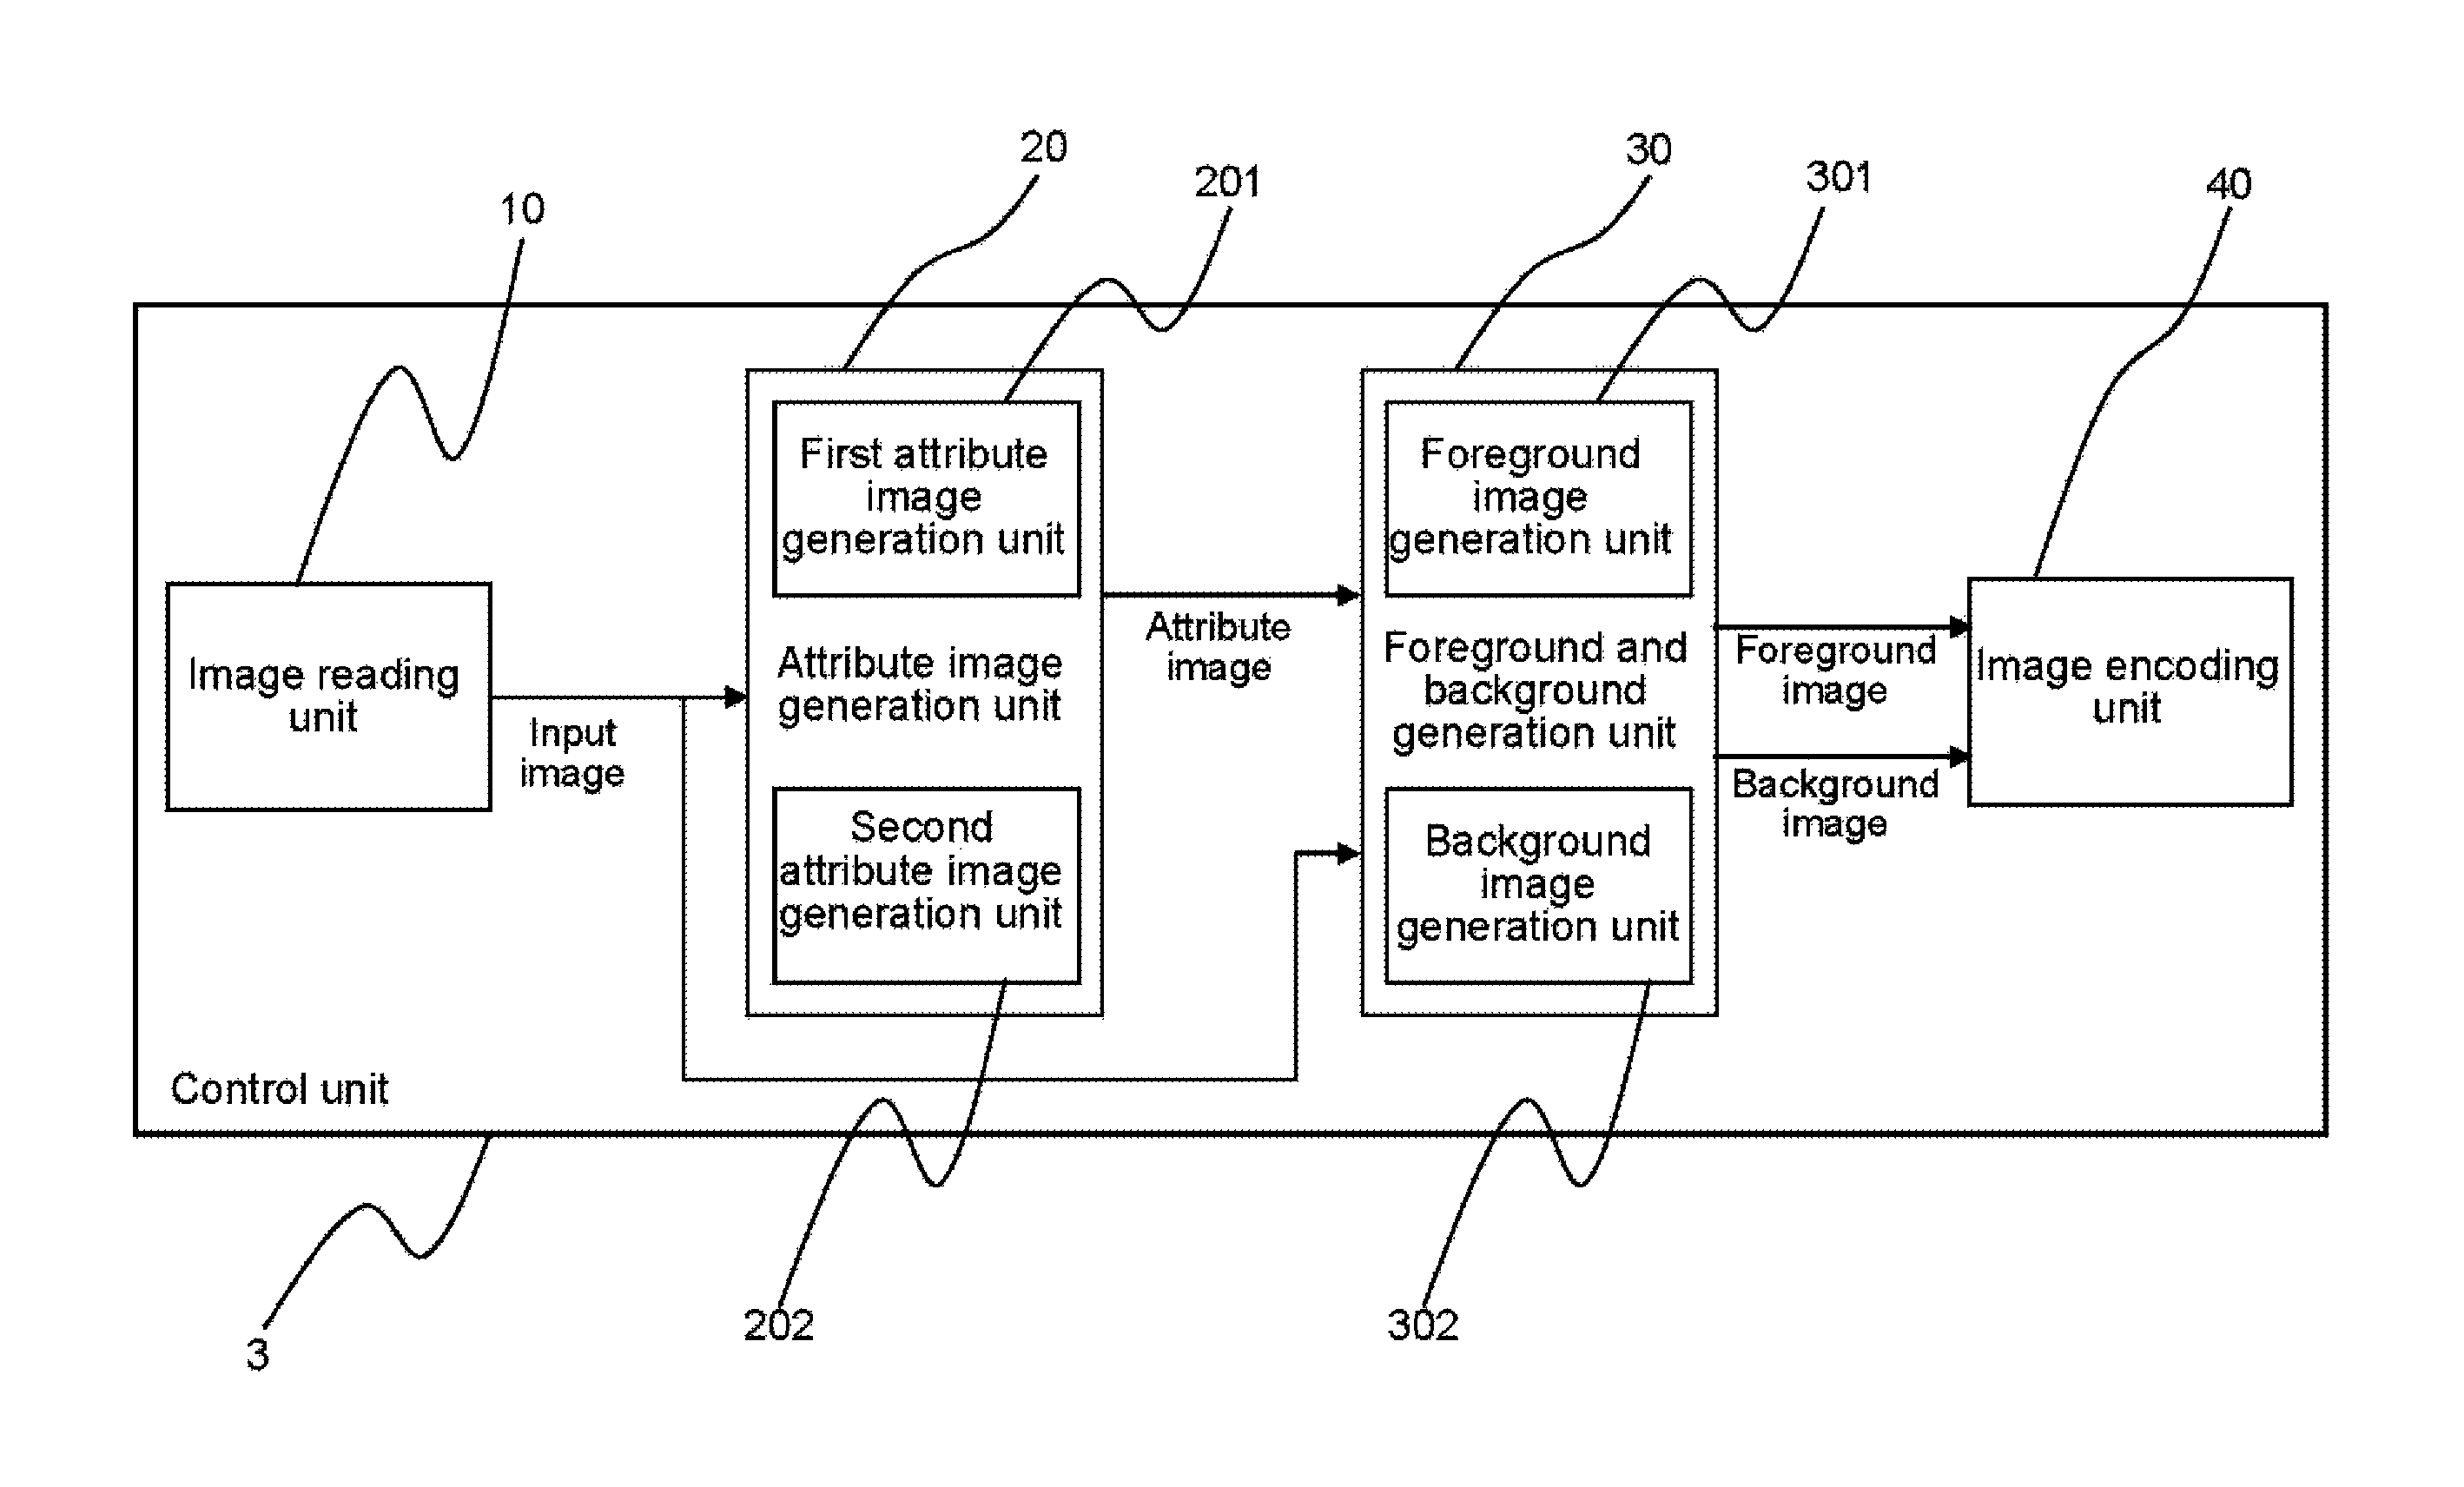 Image processing apparatus, medium, and method generating foreground image expressing color in specific region based on input image and determined image attributes